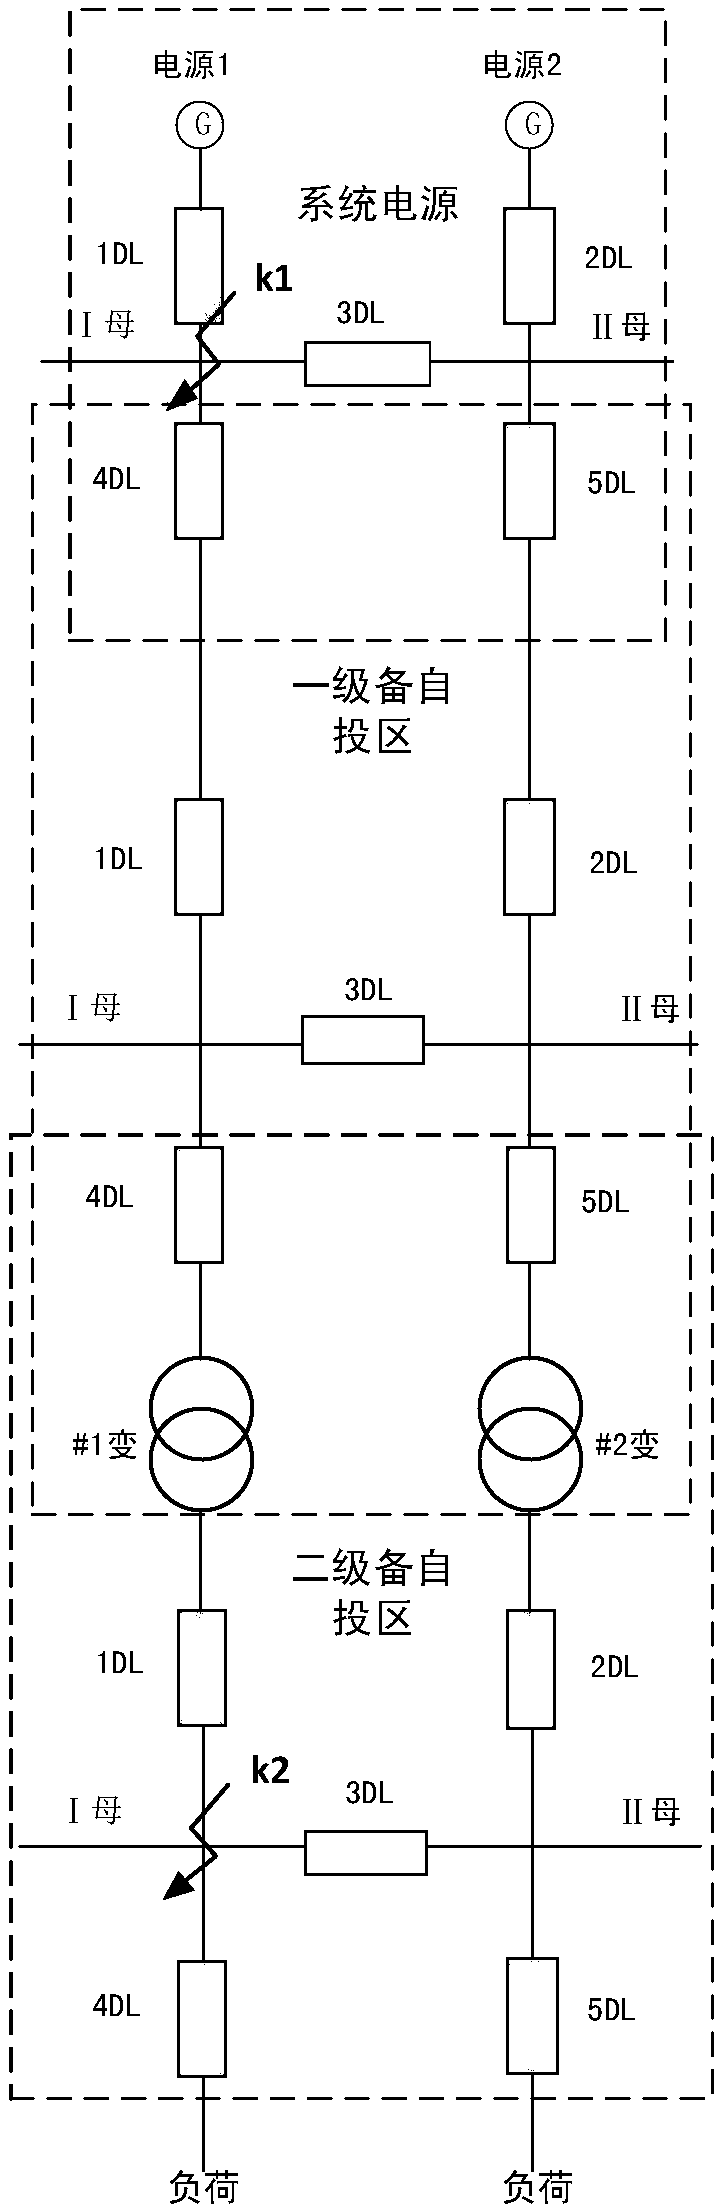 Reserved auto-switch-on method requiring free setting of fixed value based on trend direction partition topology